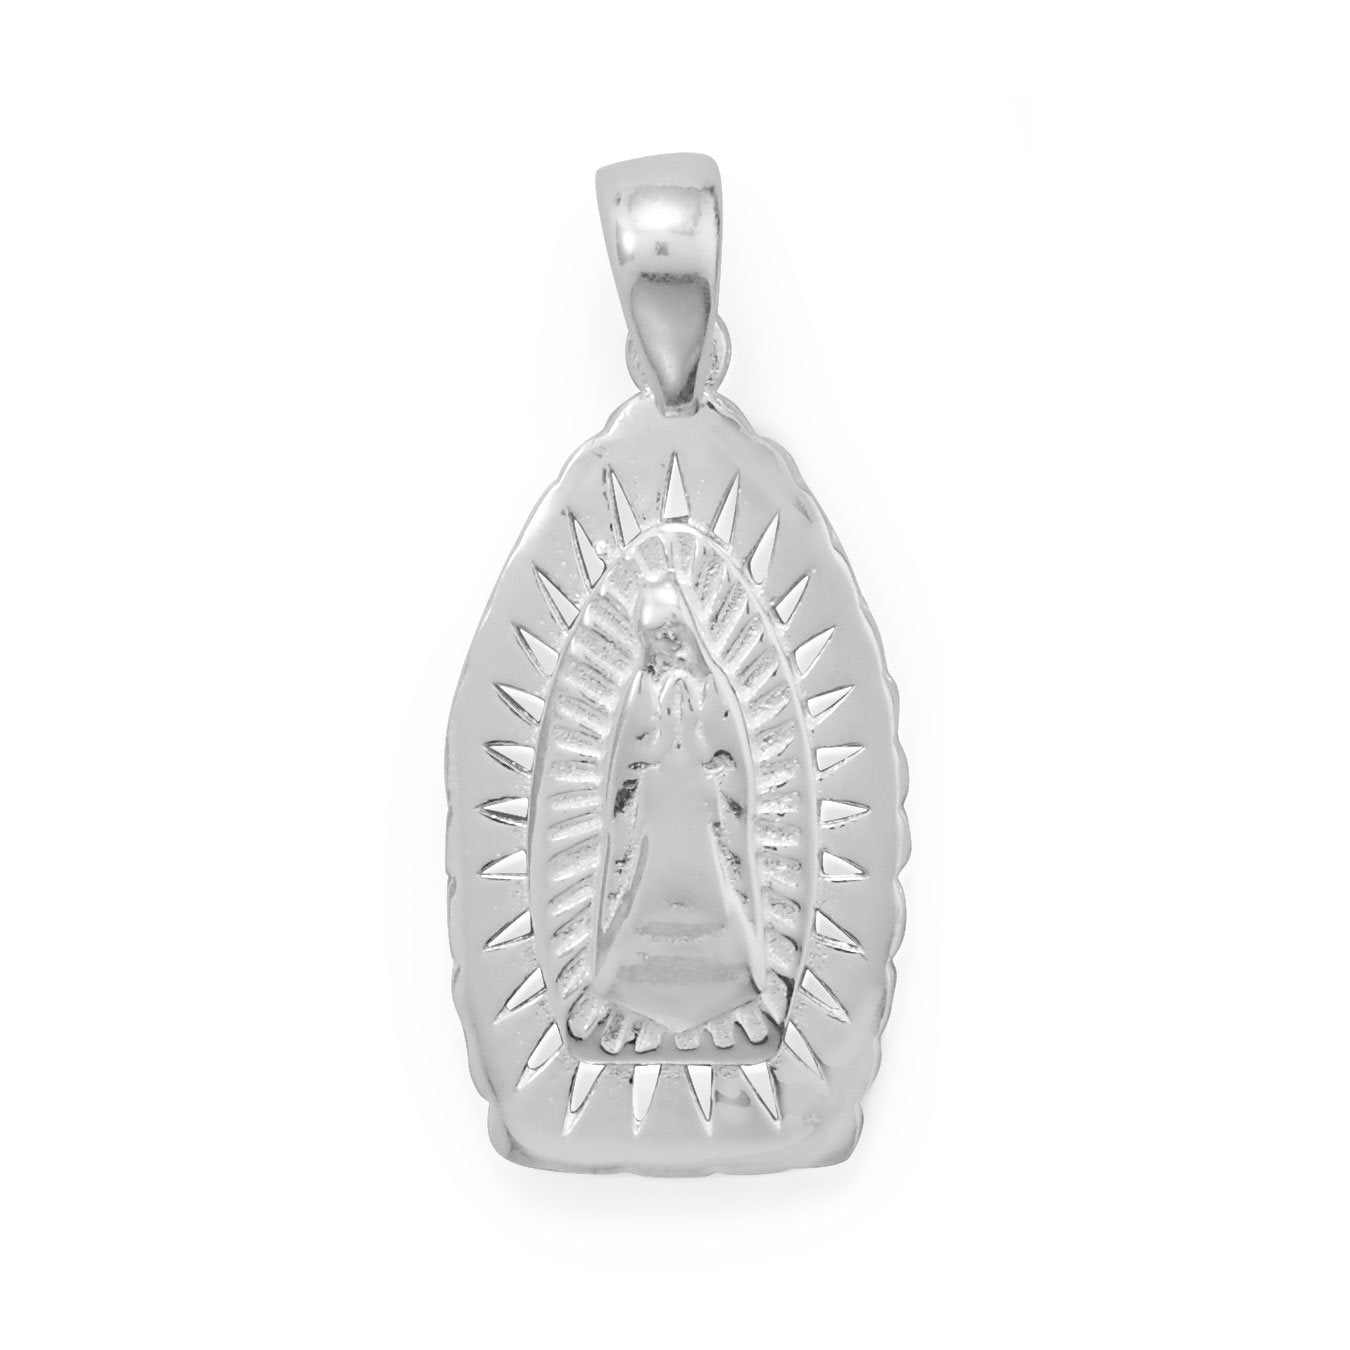 Oblong Mother Mary Pendant